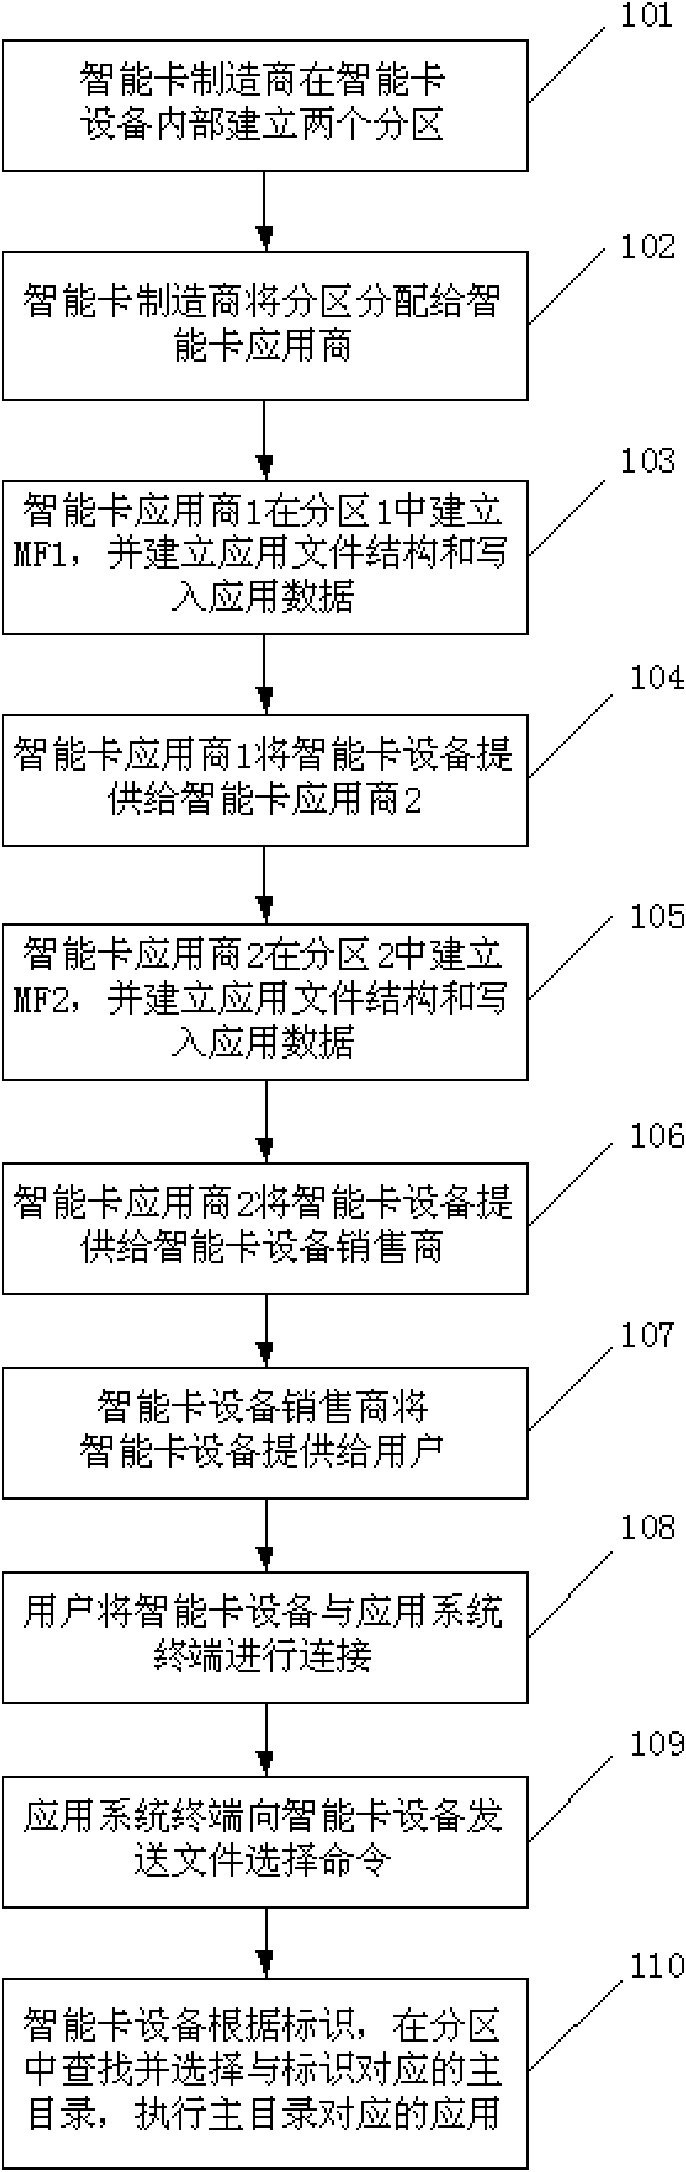 Implementation method of multi-functional smart card device